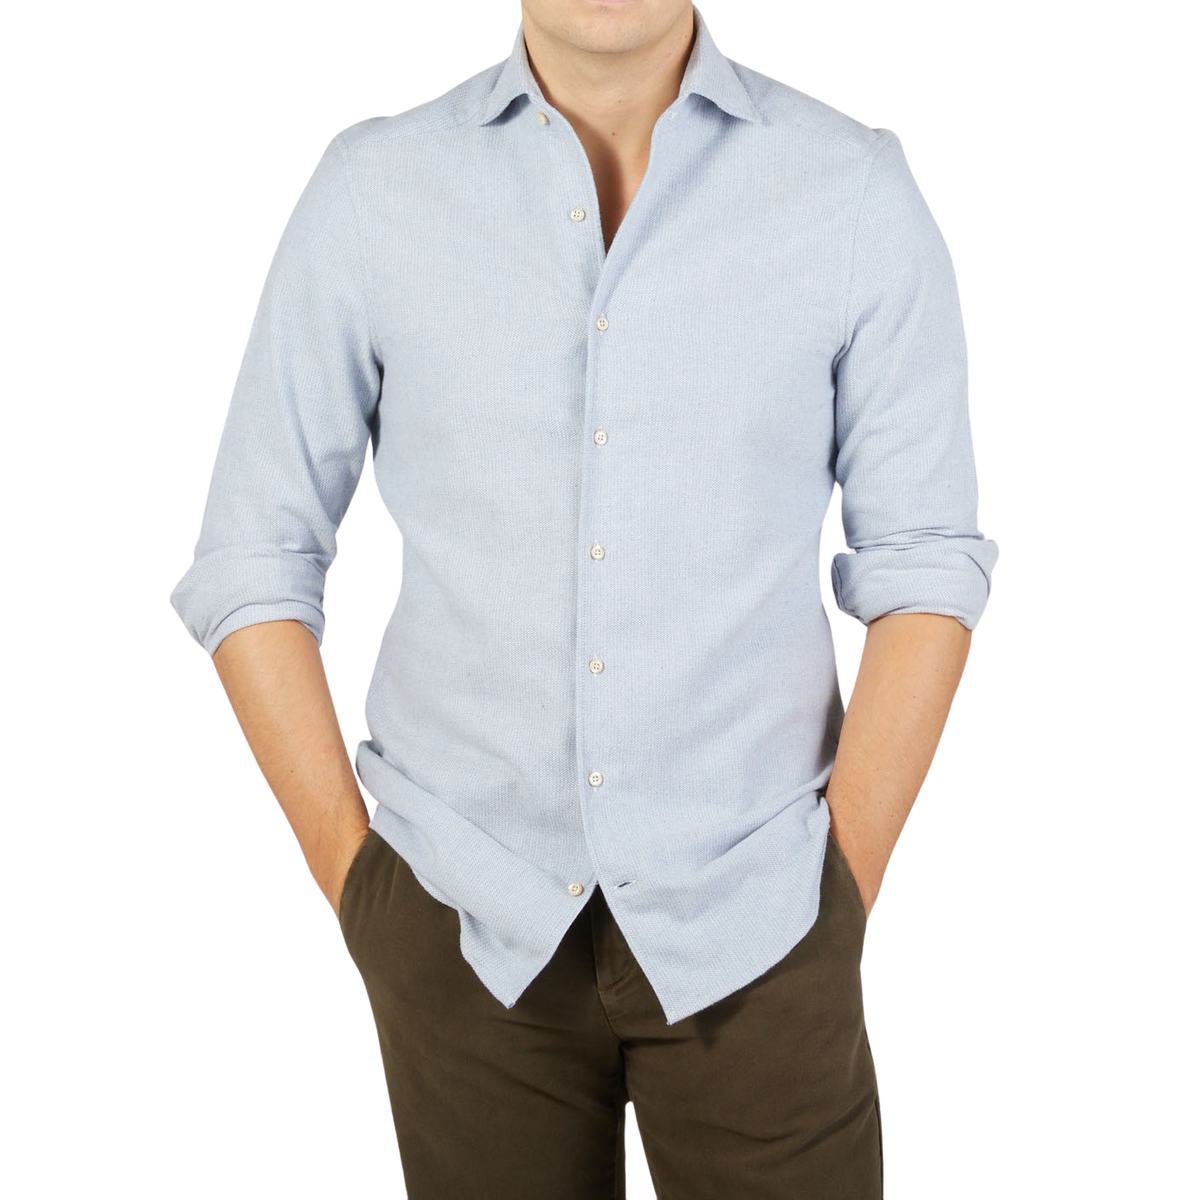 A man wearing a Stenströms Light Blue Brushed Cotton Fitted Body Shirt in a casual style.